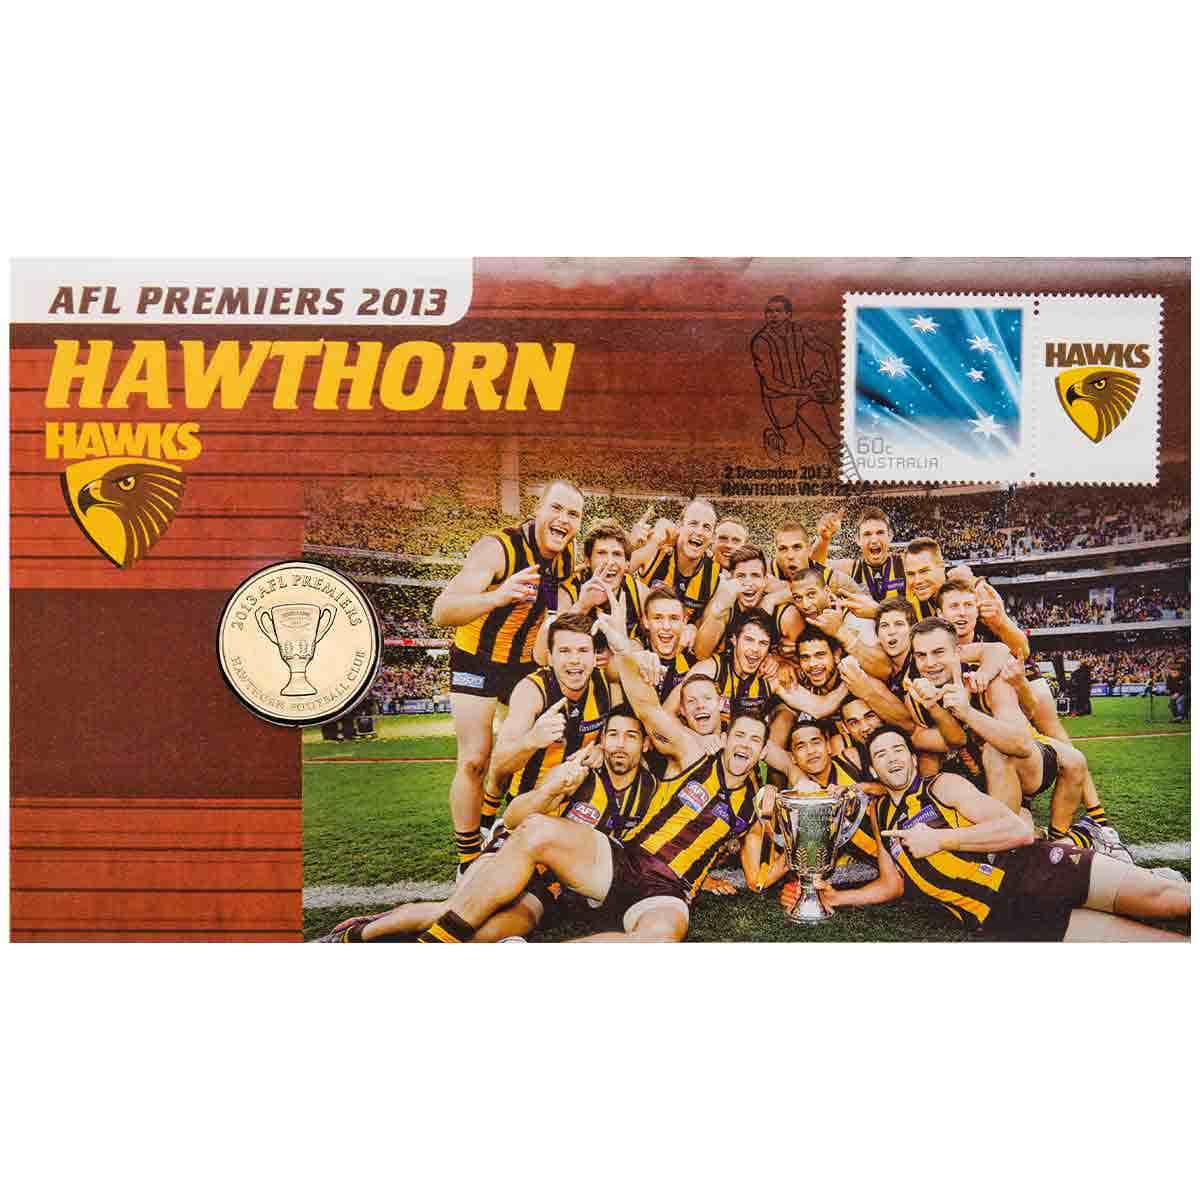 Hawthorn AFL Premiers 2013 $1 Stamp & Coin Cover